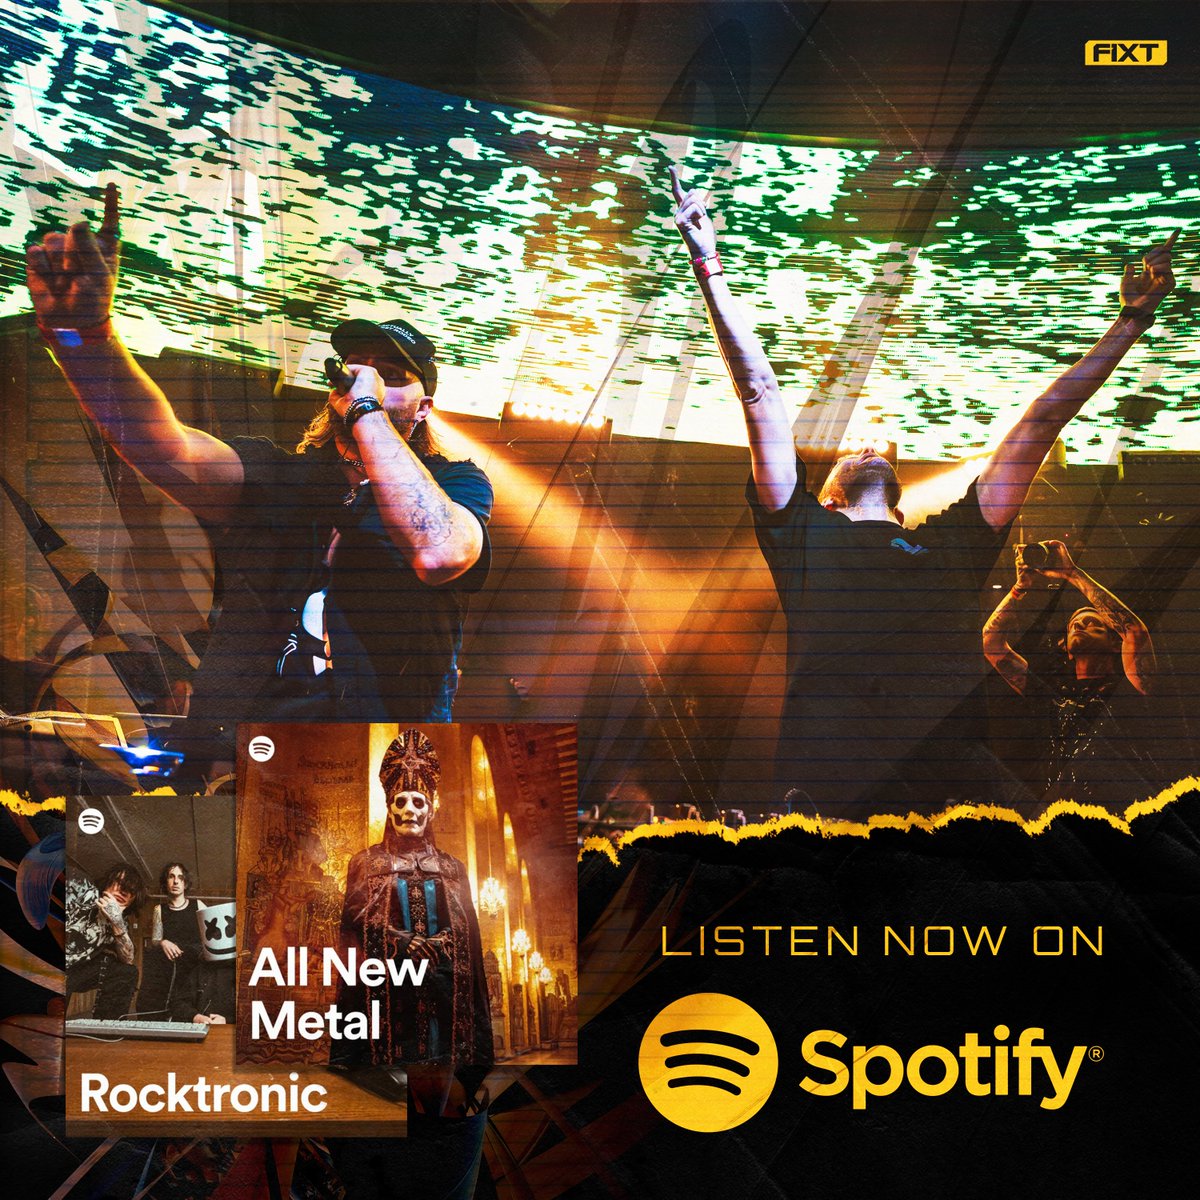 DATAMOSH Summer starts now🤘 “Voices” landed on Spotify’s “All New Metal” and “Rocktronic” playlists! @MicahTheZealot @fixtmusic